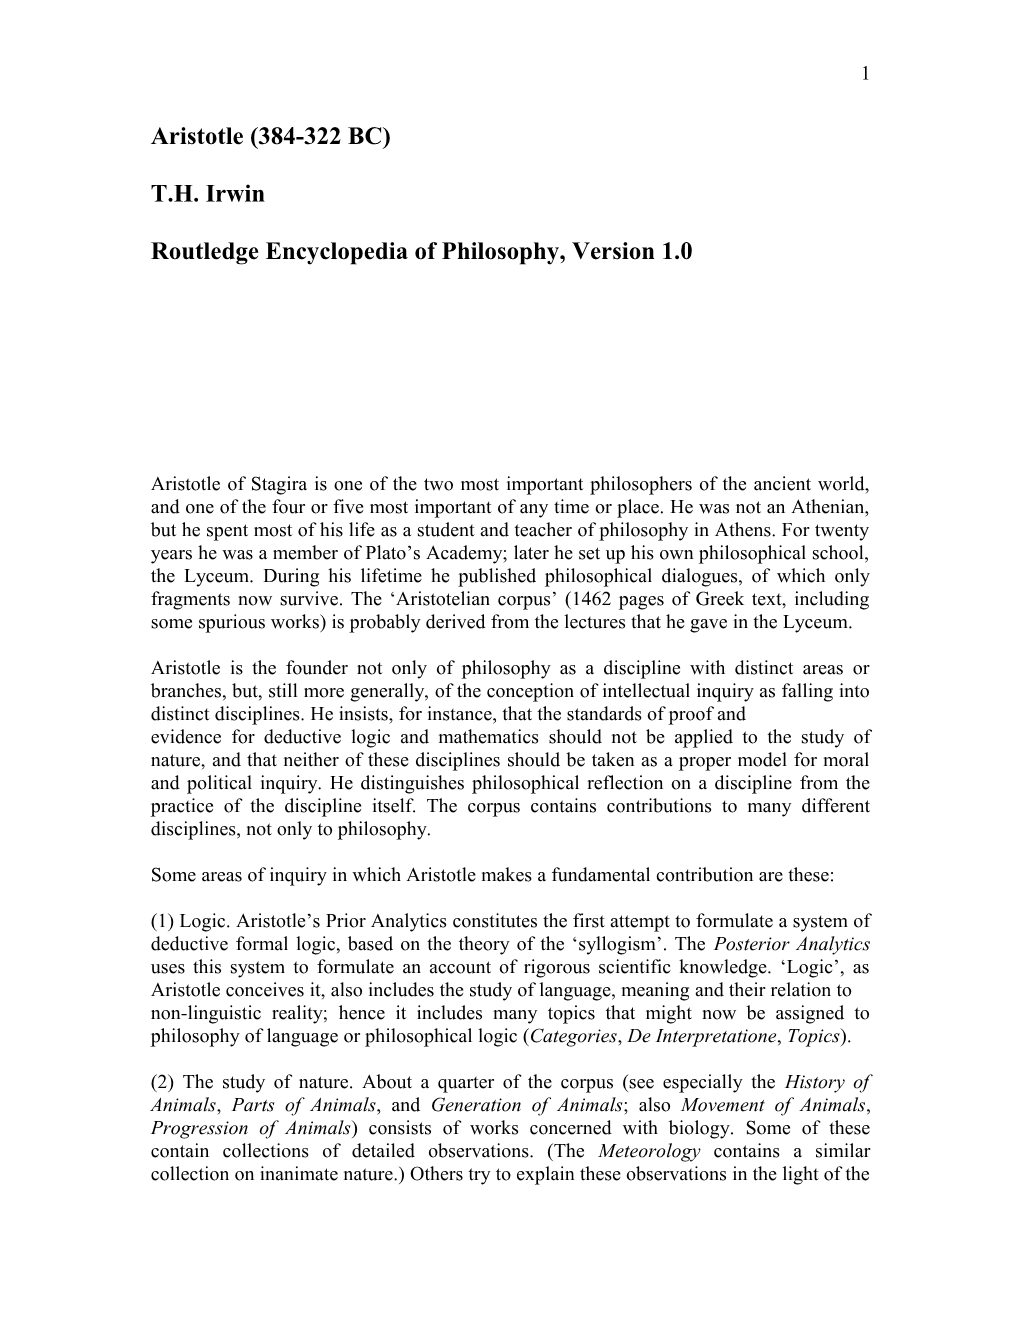 Routledge Encyclopedia of Philosophy, Version 1.0